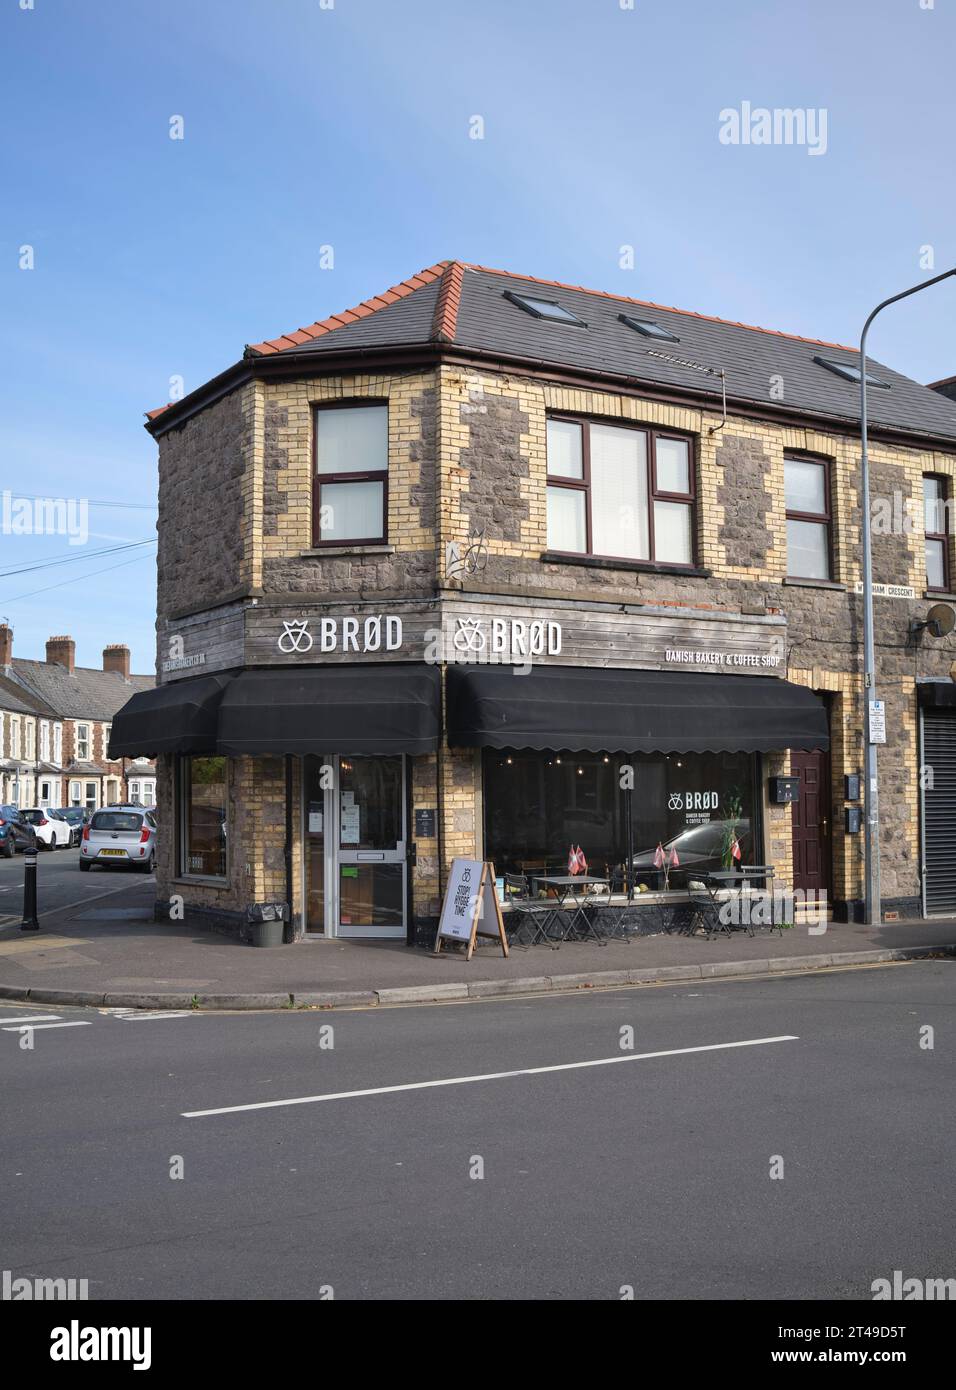 Brod Bakery and Coffee Shop Wyndham Crescent Cardiff South Wales UK Stock Photo